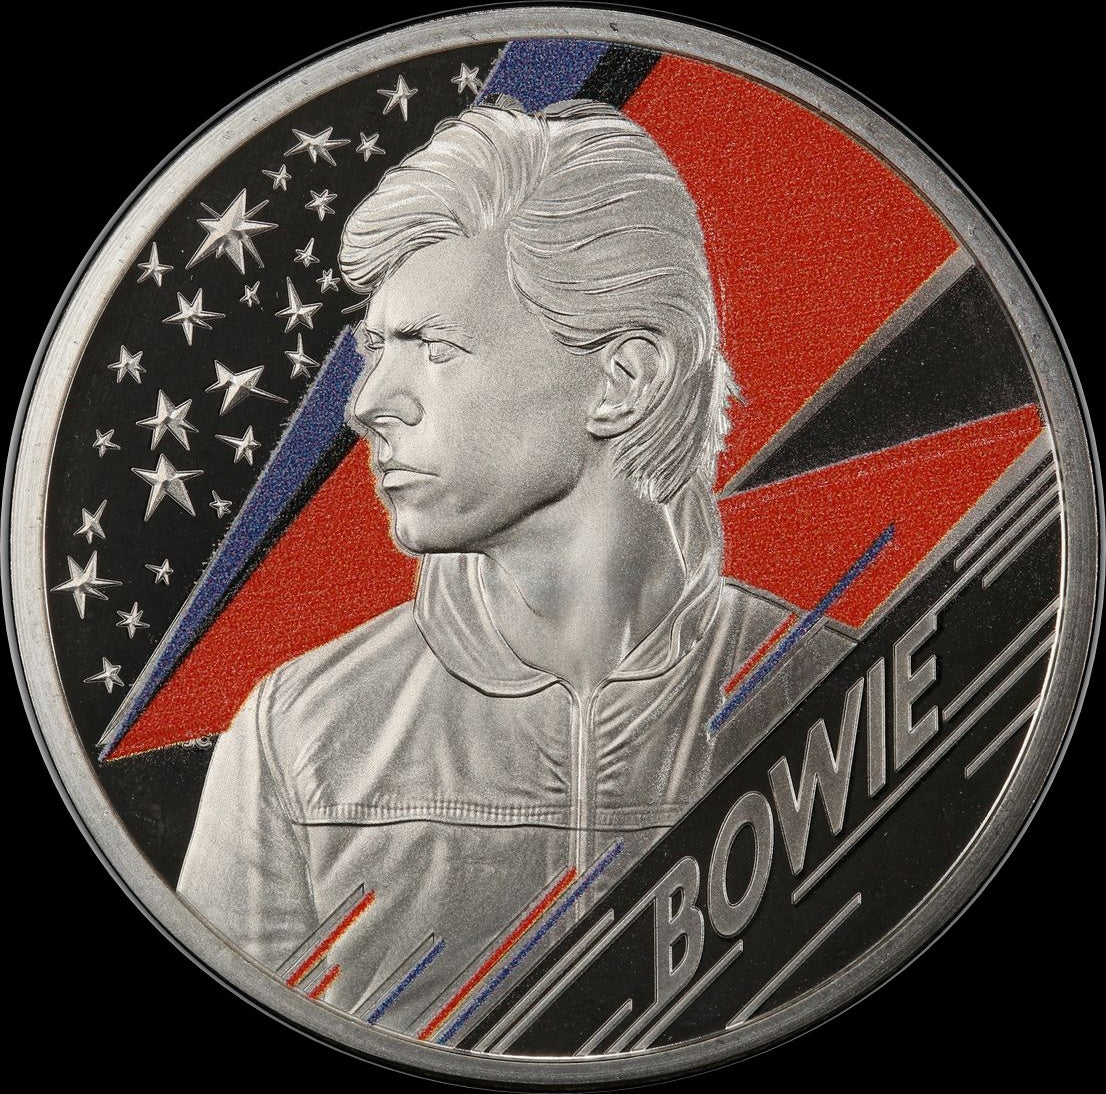 DAVID BOWIE, Music Legends series, 1 oz Silver Proof Colored PF69 Error Coin 2£, 2020